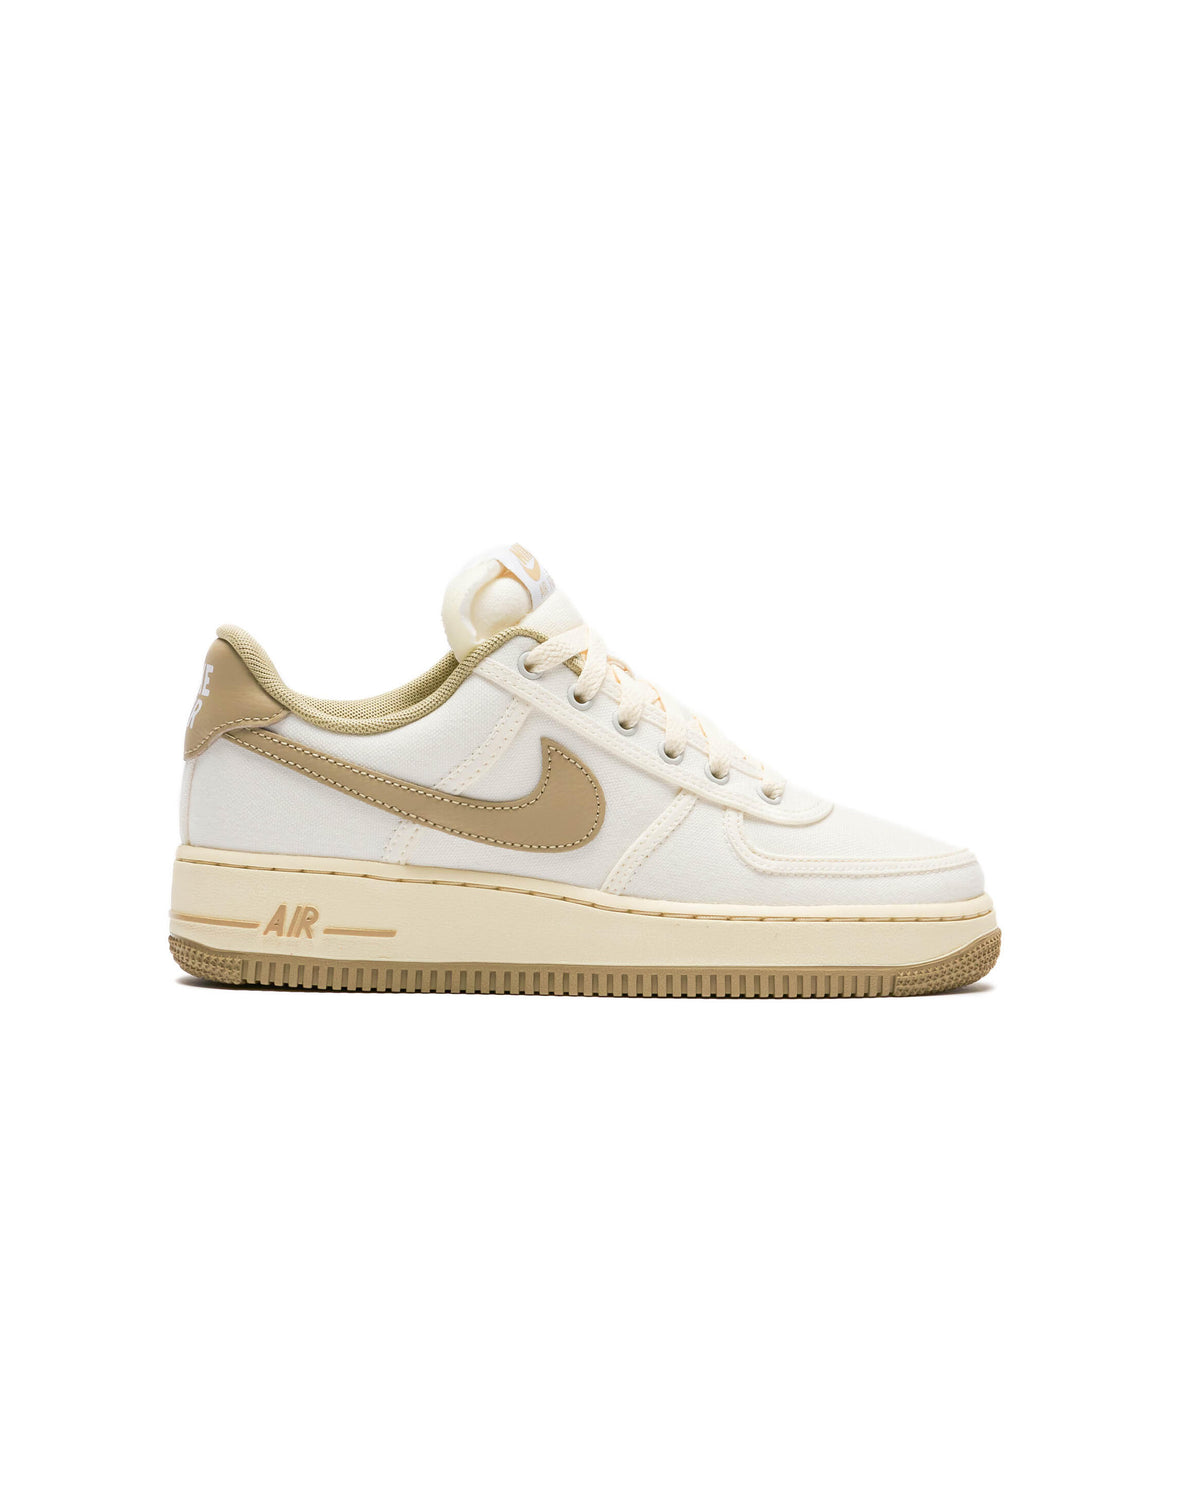 Nike WMNS AIR FORCE 1 '07